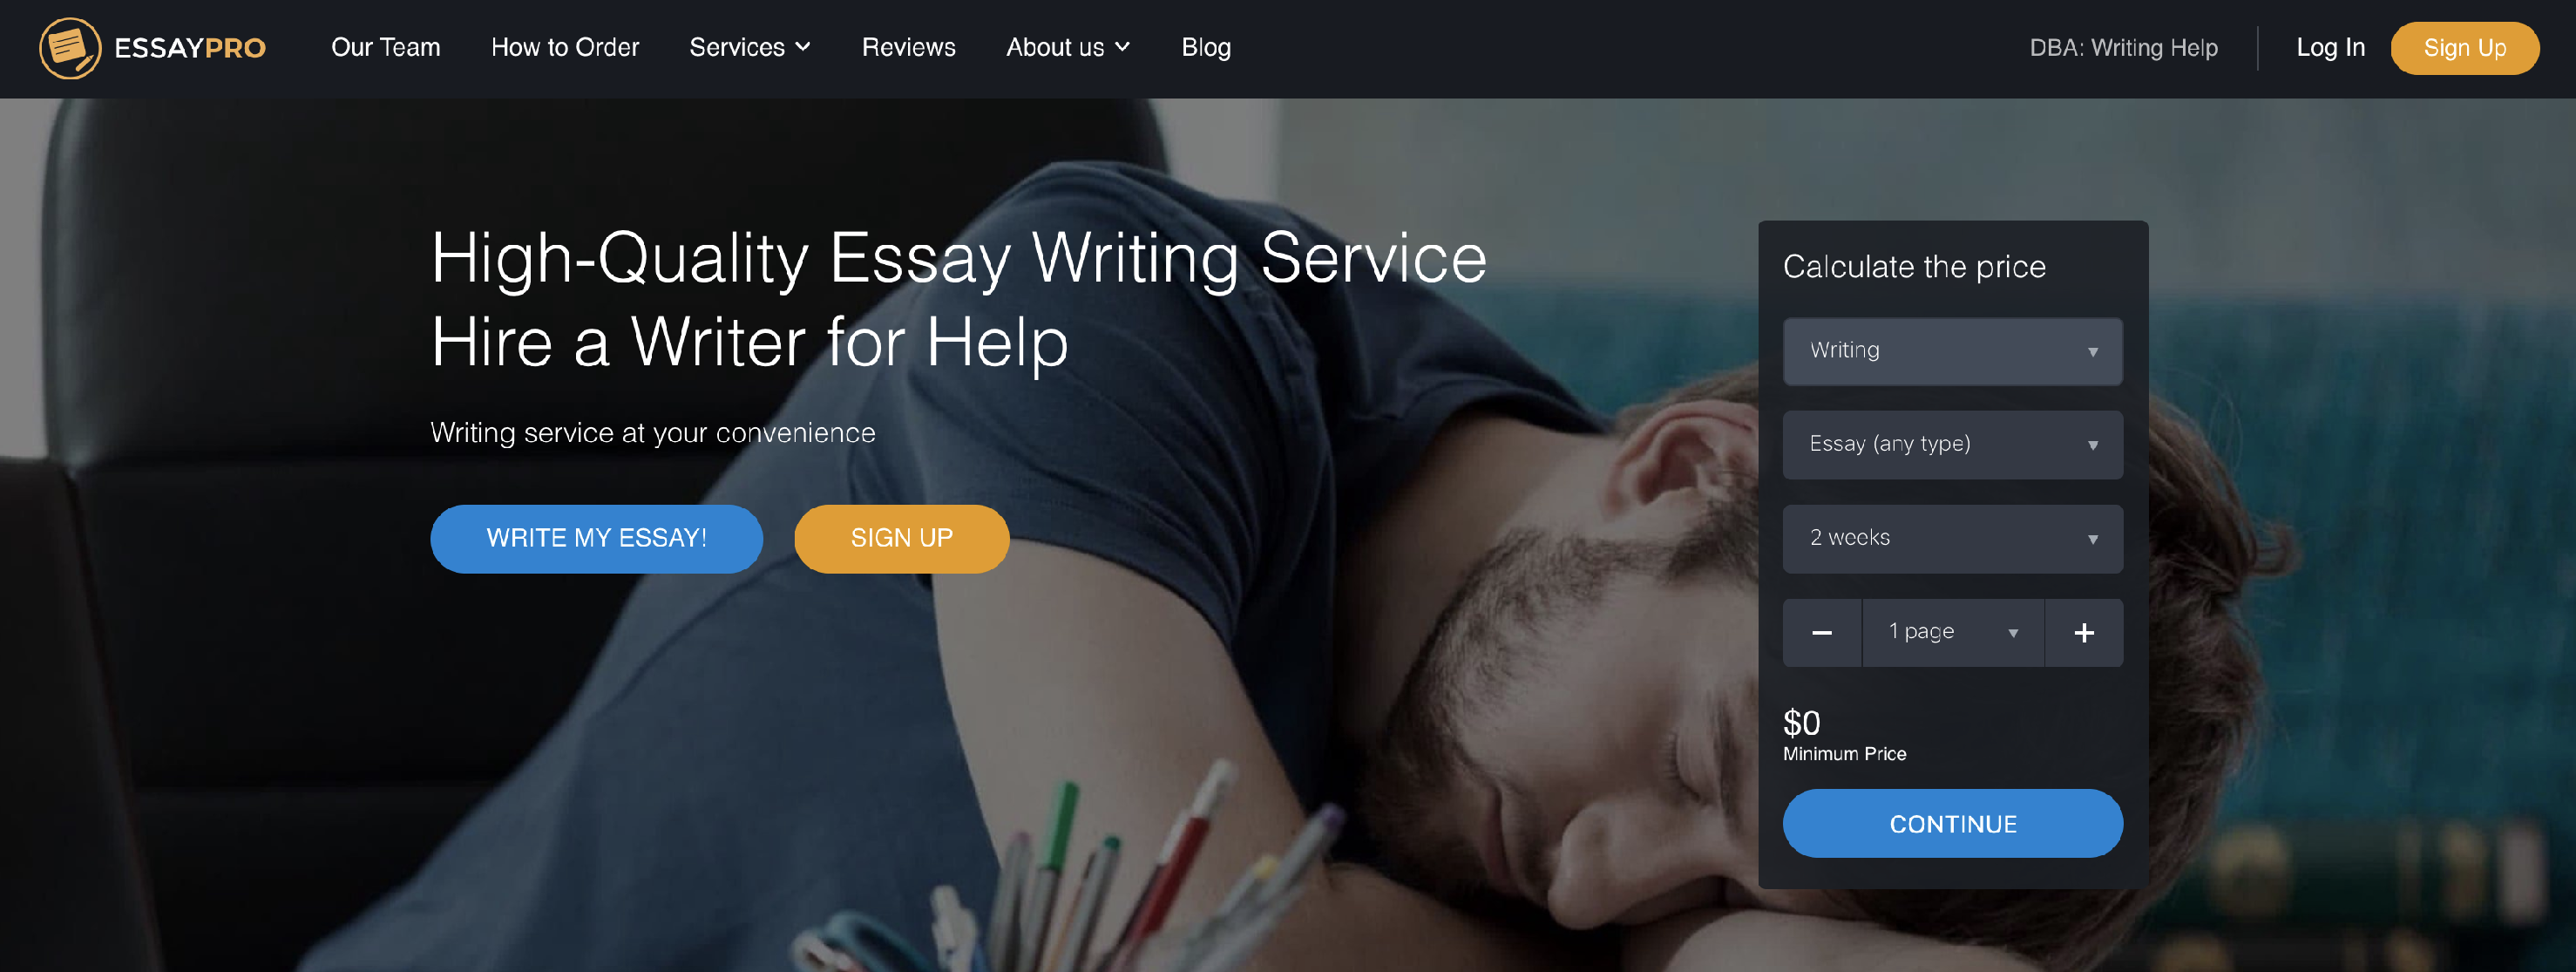 online paper writing service reviews